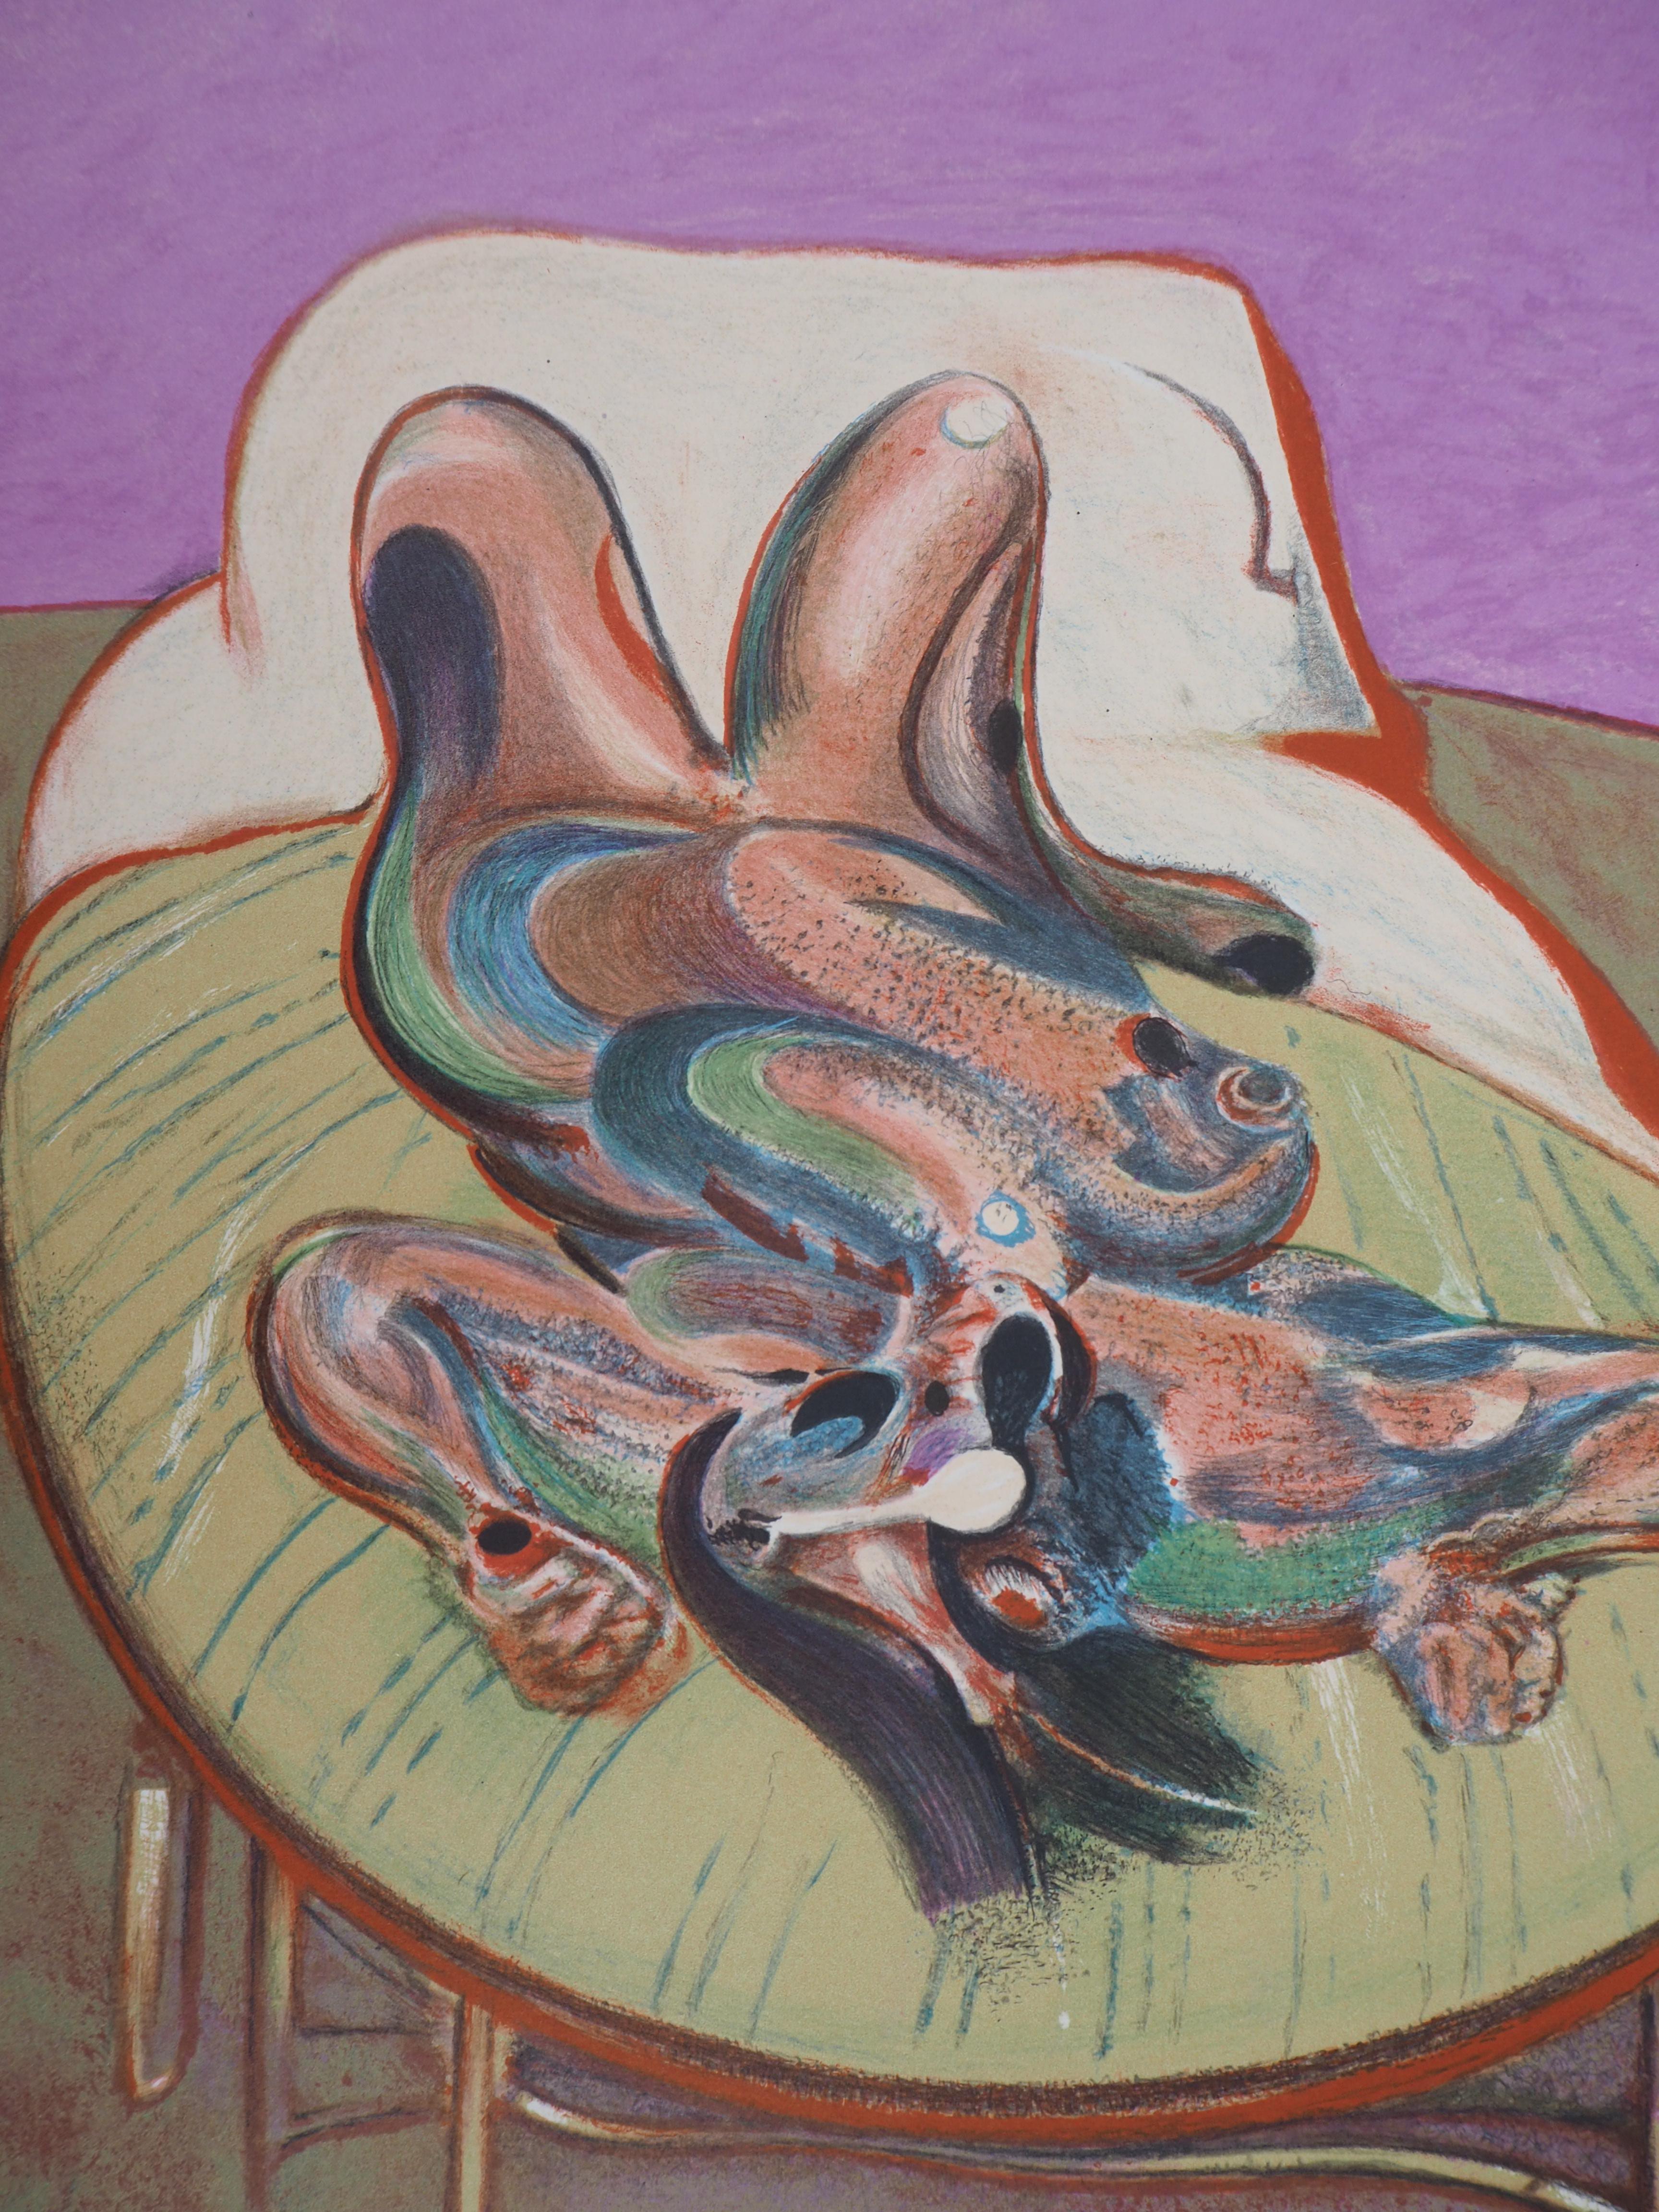 Lying Woman - Original vintage lithograph poster, Maeght 1966 - Gray Figurative Print by (after) Francis Bacon